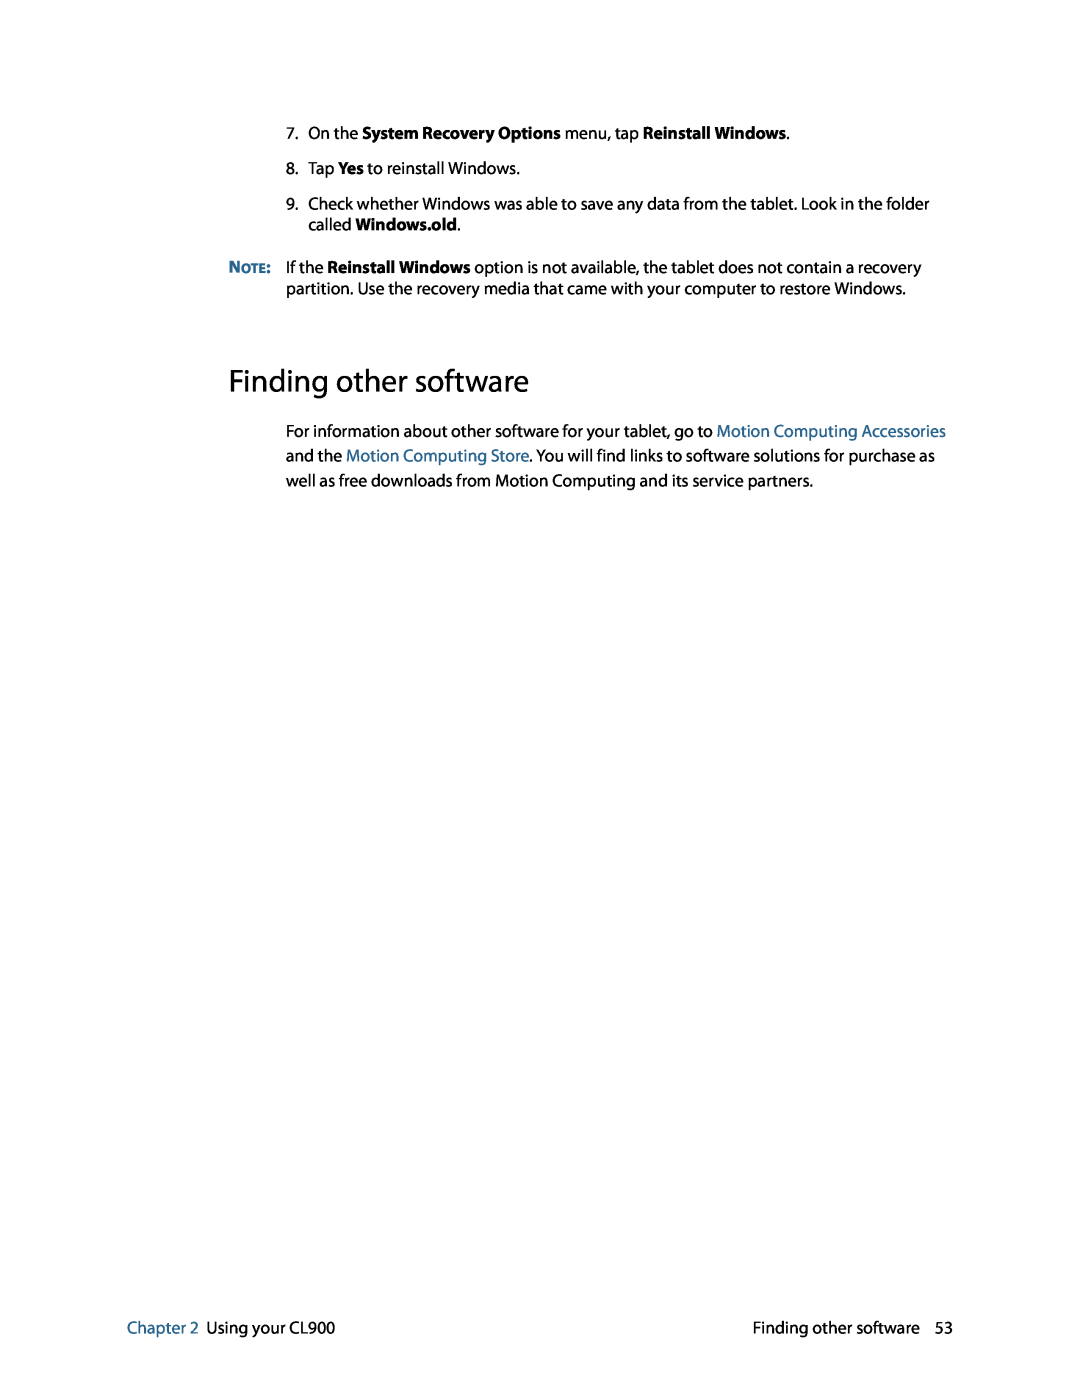 Motion FWS-001 manual Finding other software, On the System Recovery Options menu, tap Reinstall Windows 